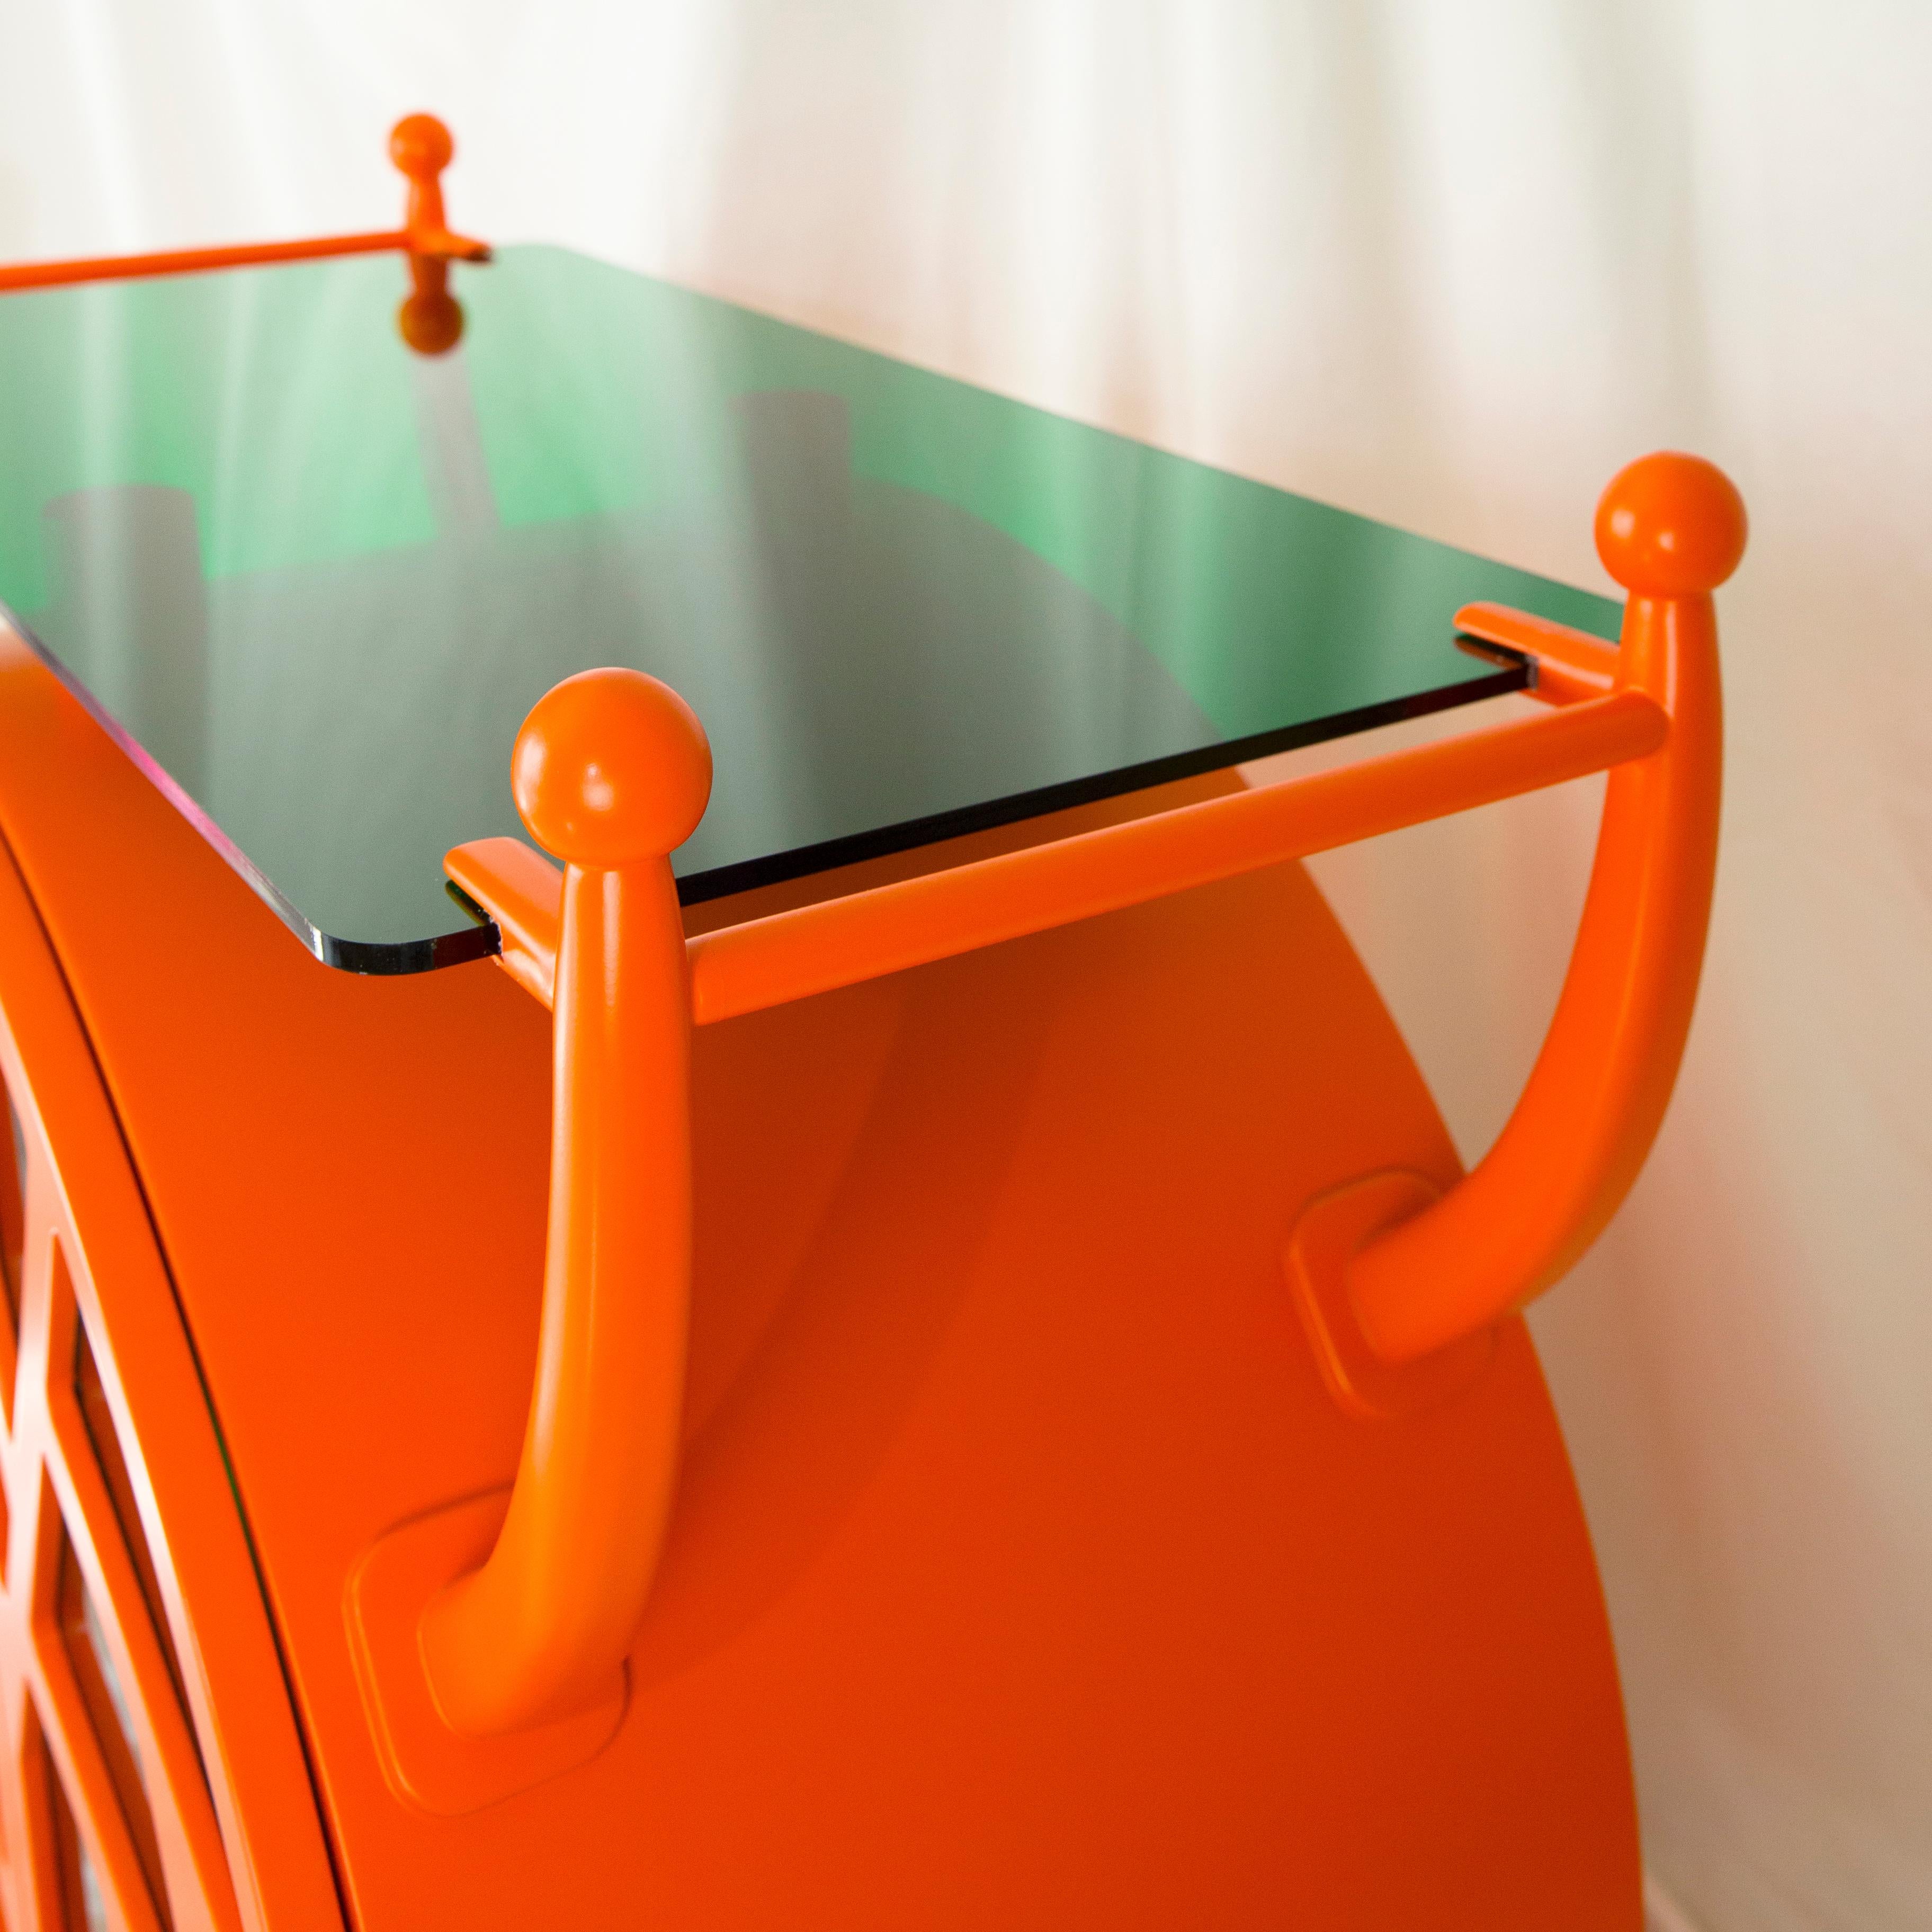 Overview:
Add a splash of vibrant style to your home with the Cocktail Bug Buffet, an orange-colored, bug-inspired liquor cabinet that combines postmodern design with a playful twist. This standout piece is sure to be the focal point in any room,